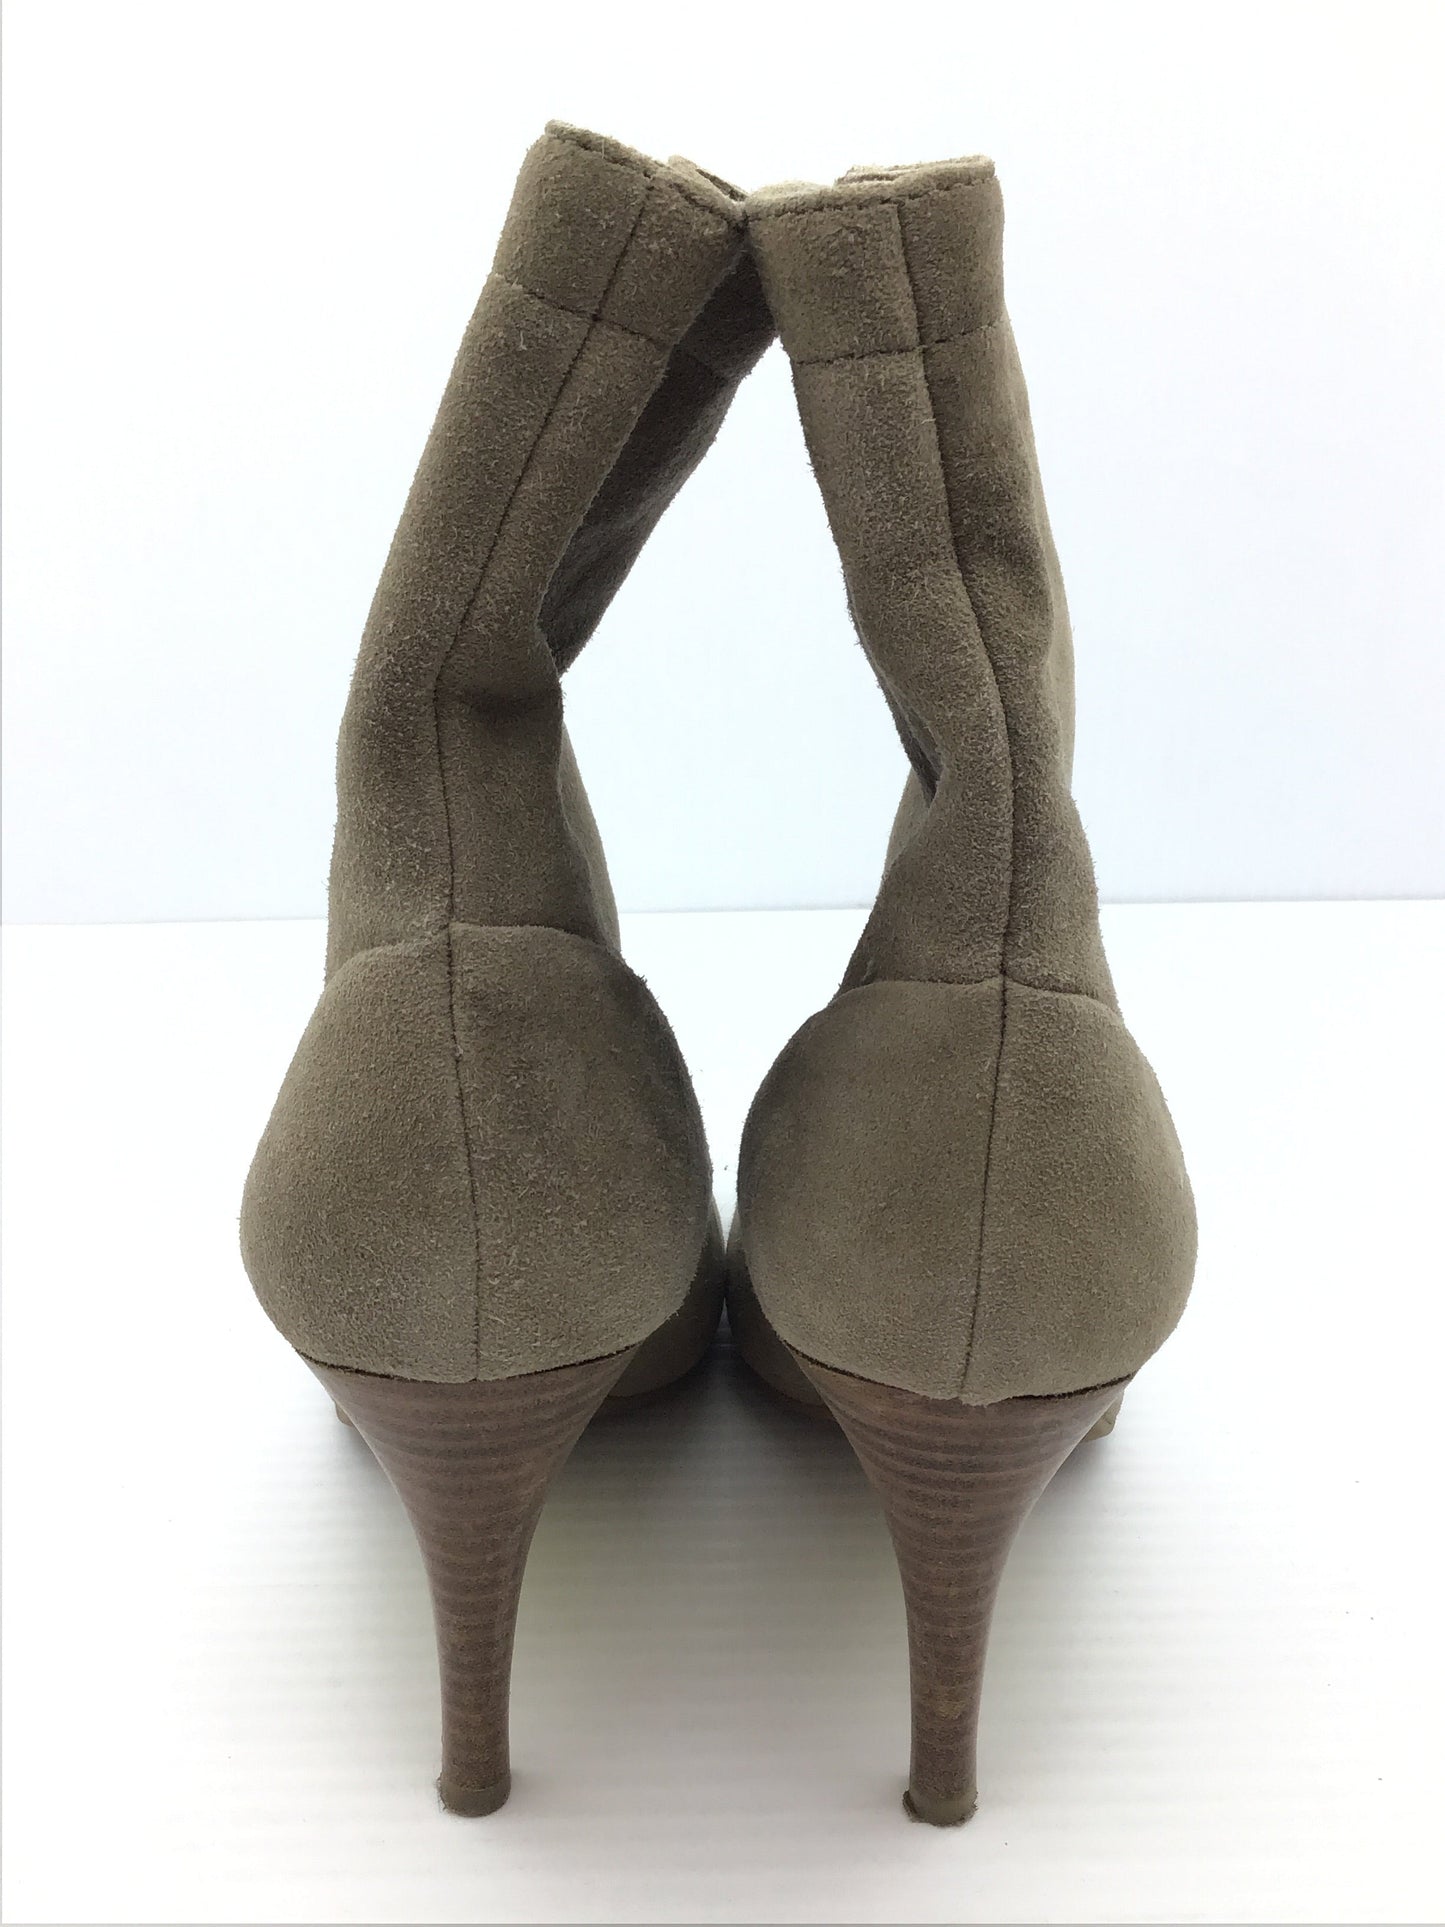 Boots Ankle Heels By Coach  Size: 6